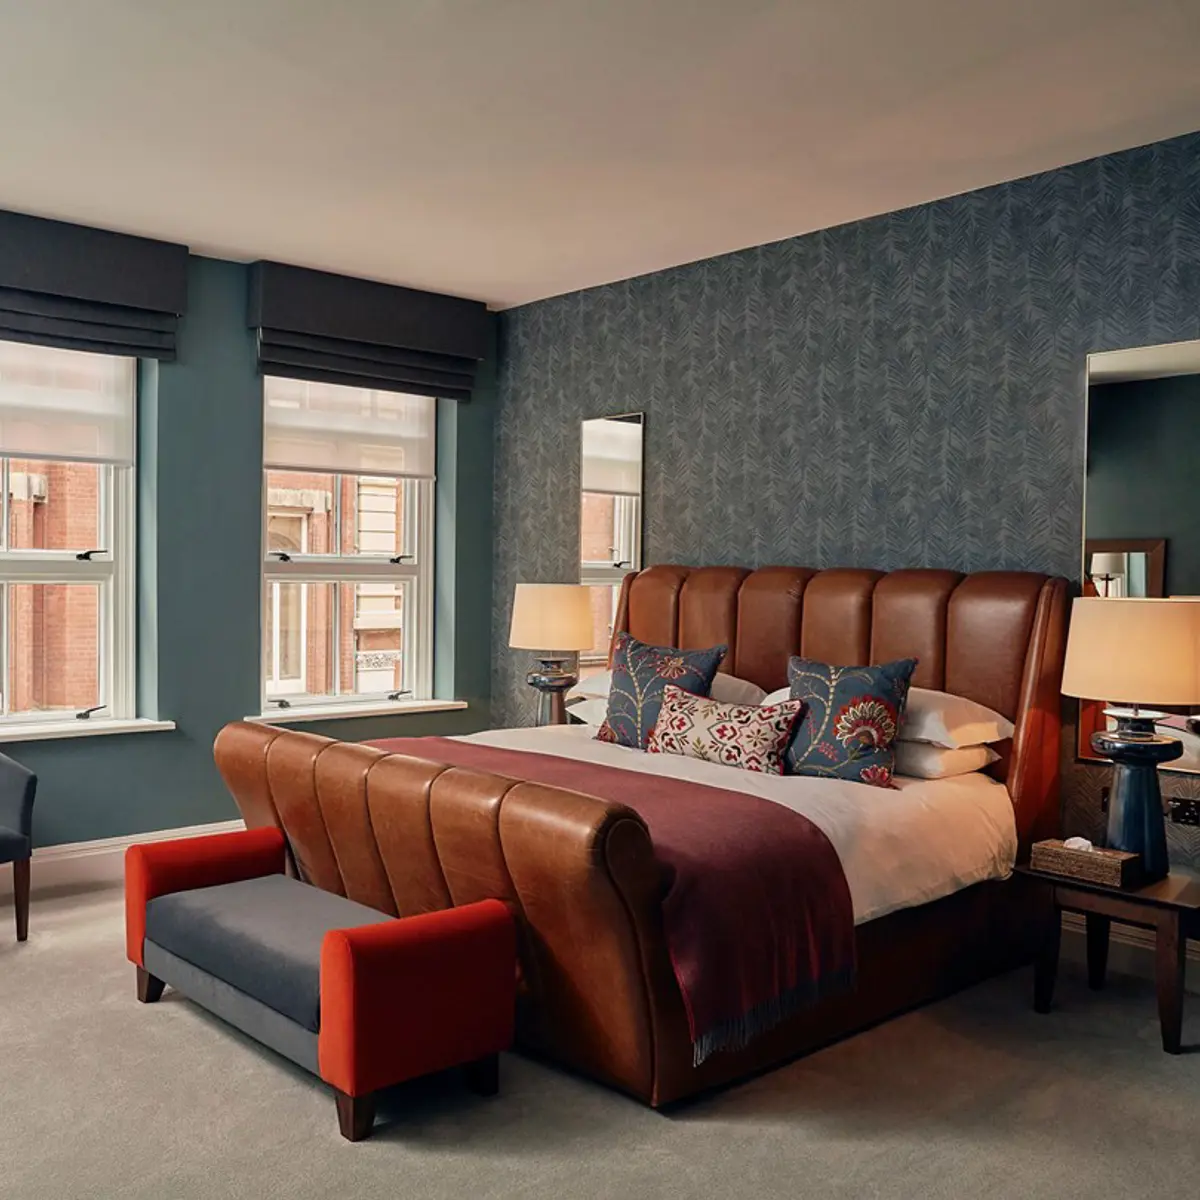 A deluxe room at Malmaison with a super-comfy bed.